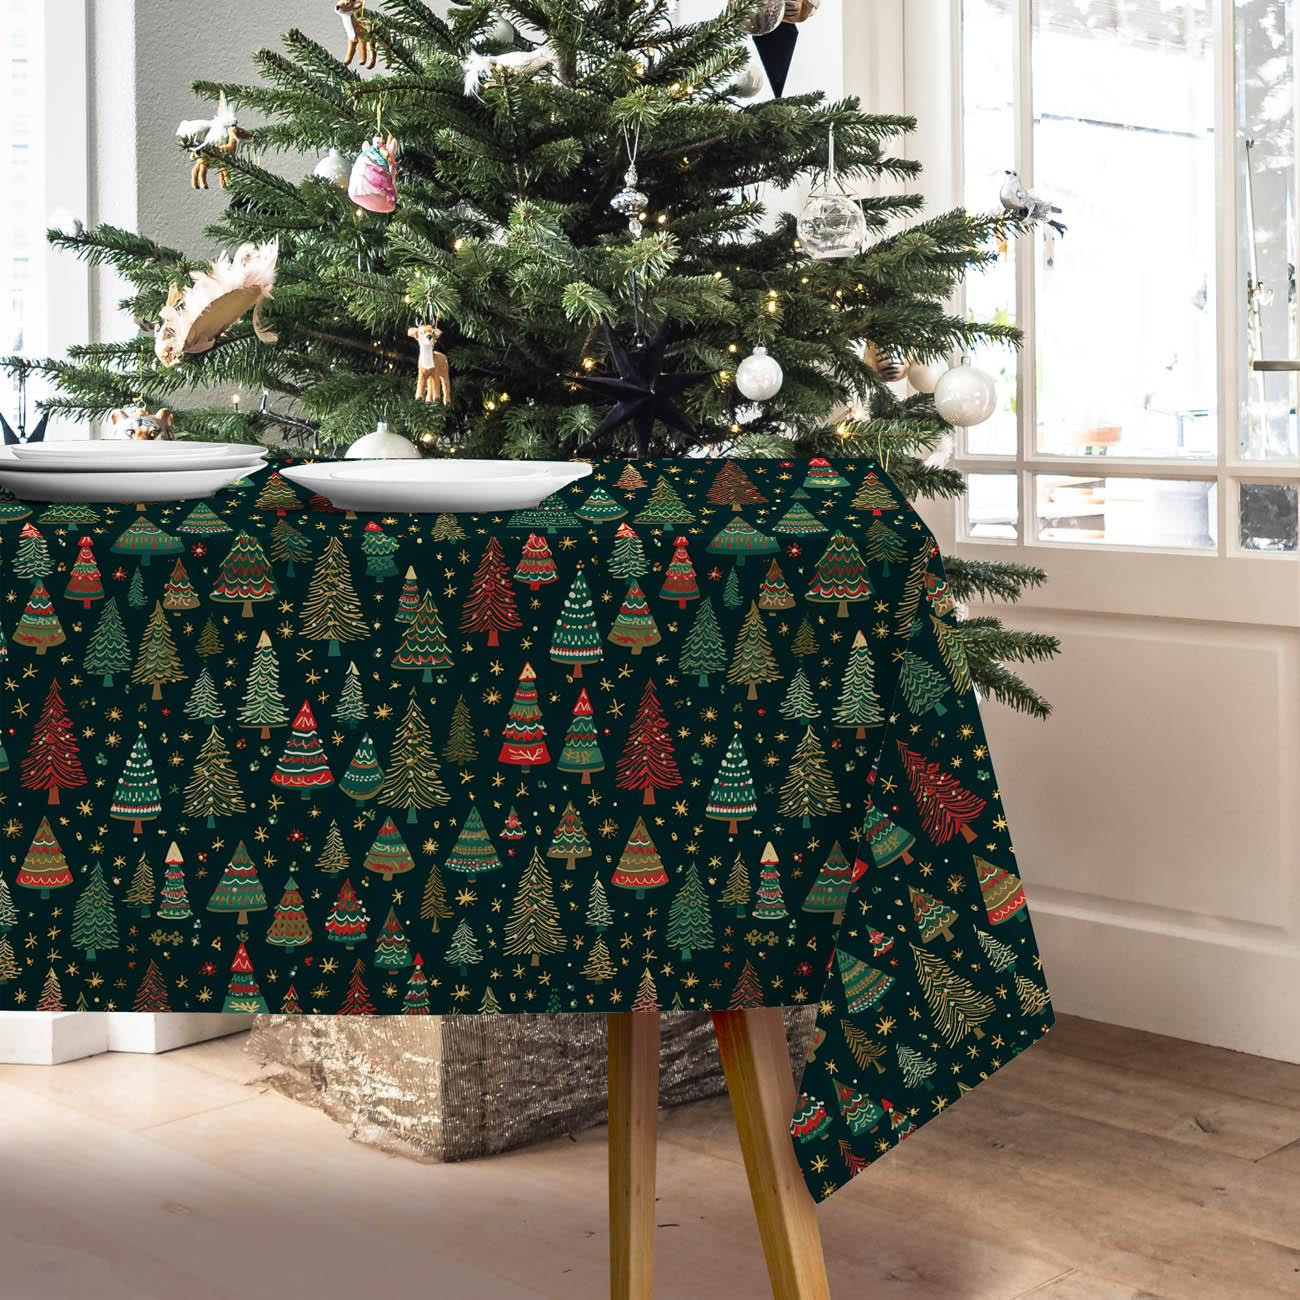 CHRISTMAS TREE PAT. 2 - Woven Fabric for tablecloths